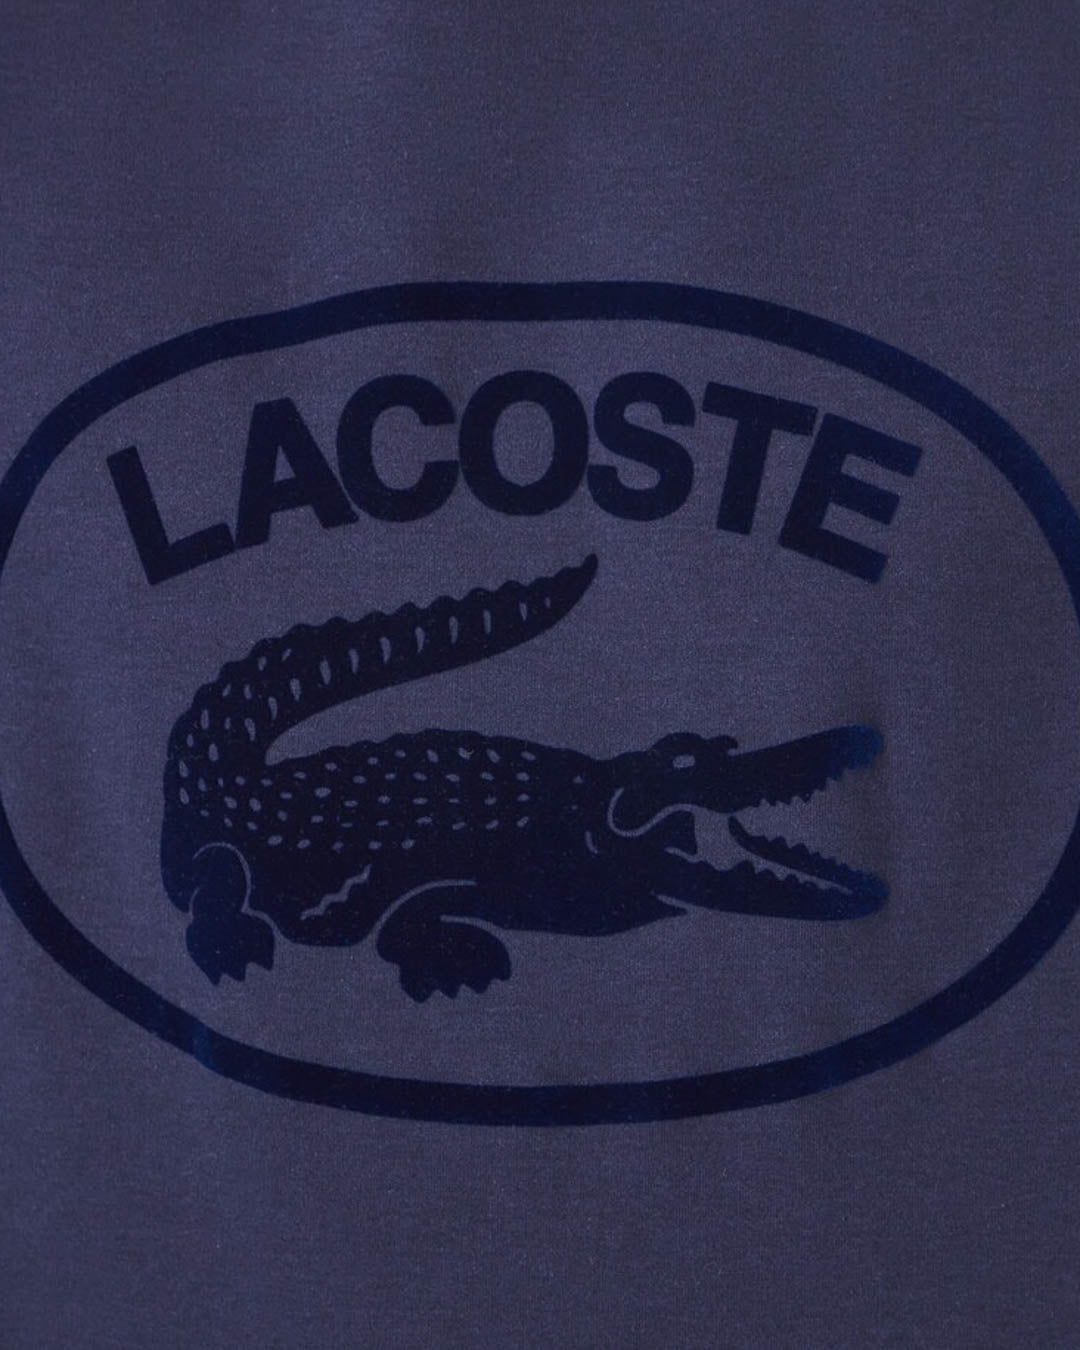 Lacoste Herre Relaxed Fit tone-i-tone mærket bomuld T-shirt